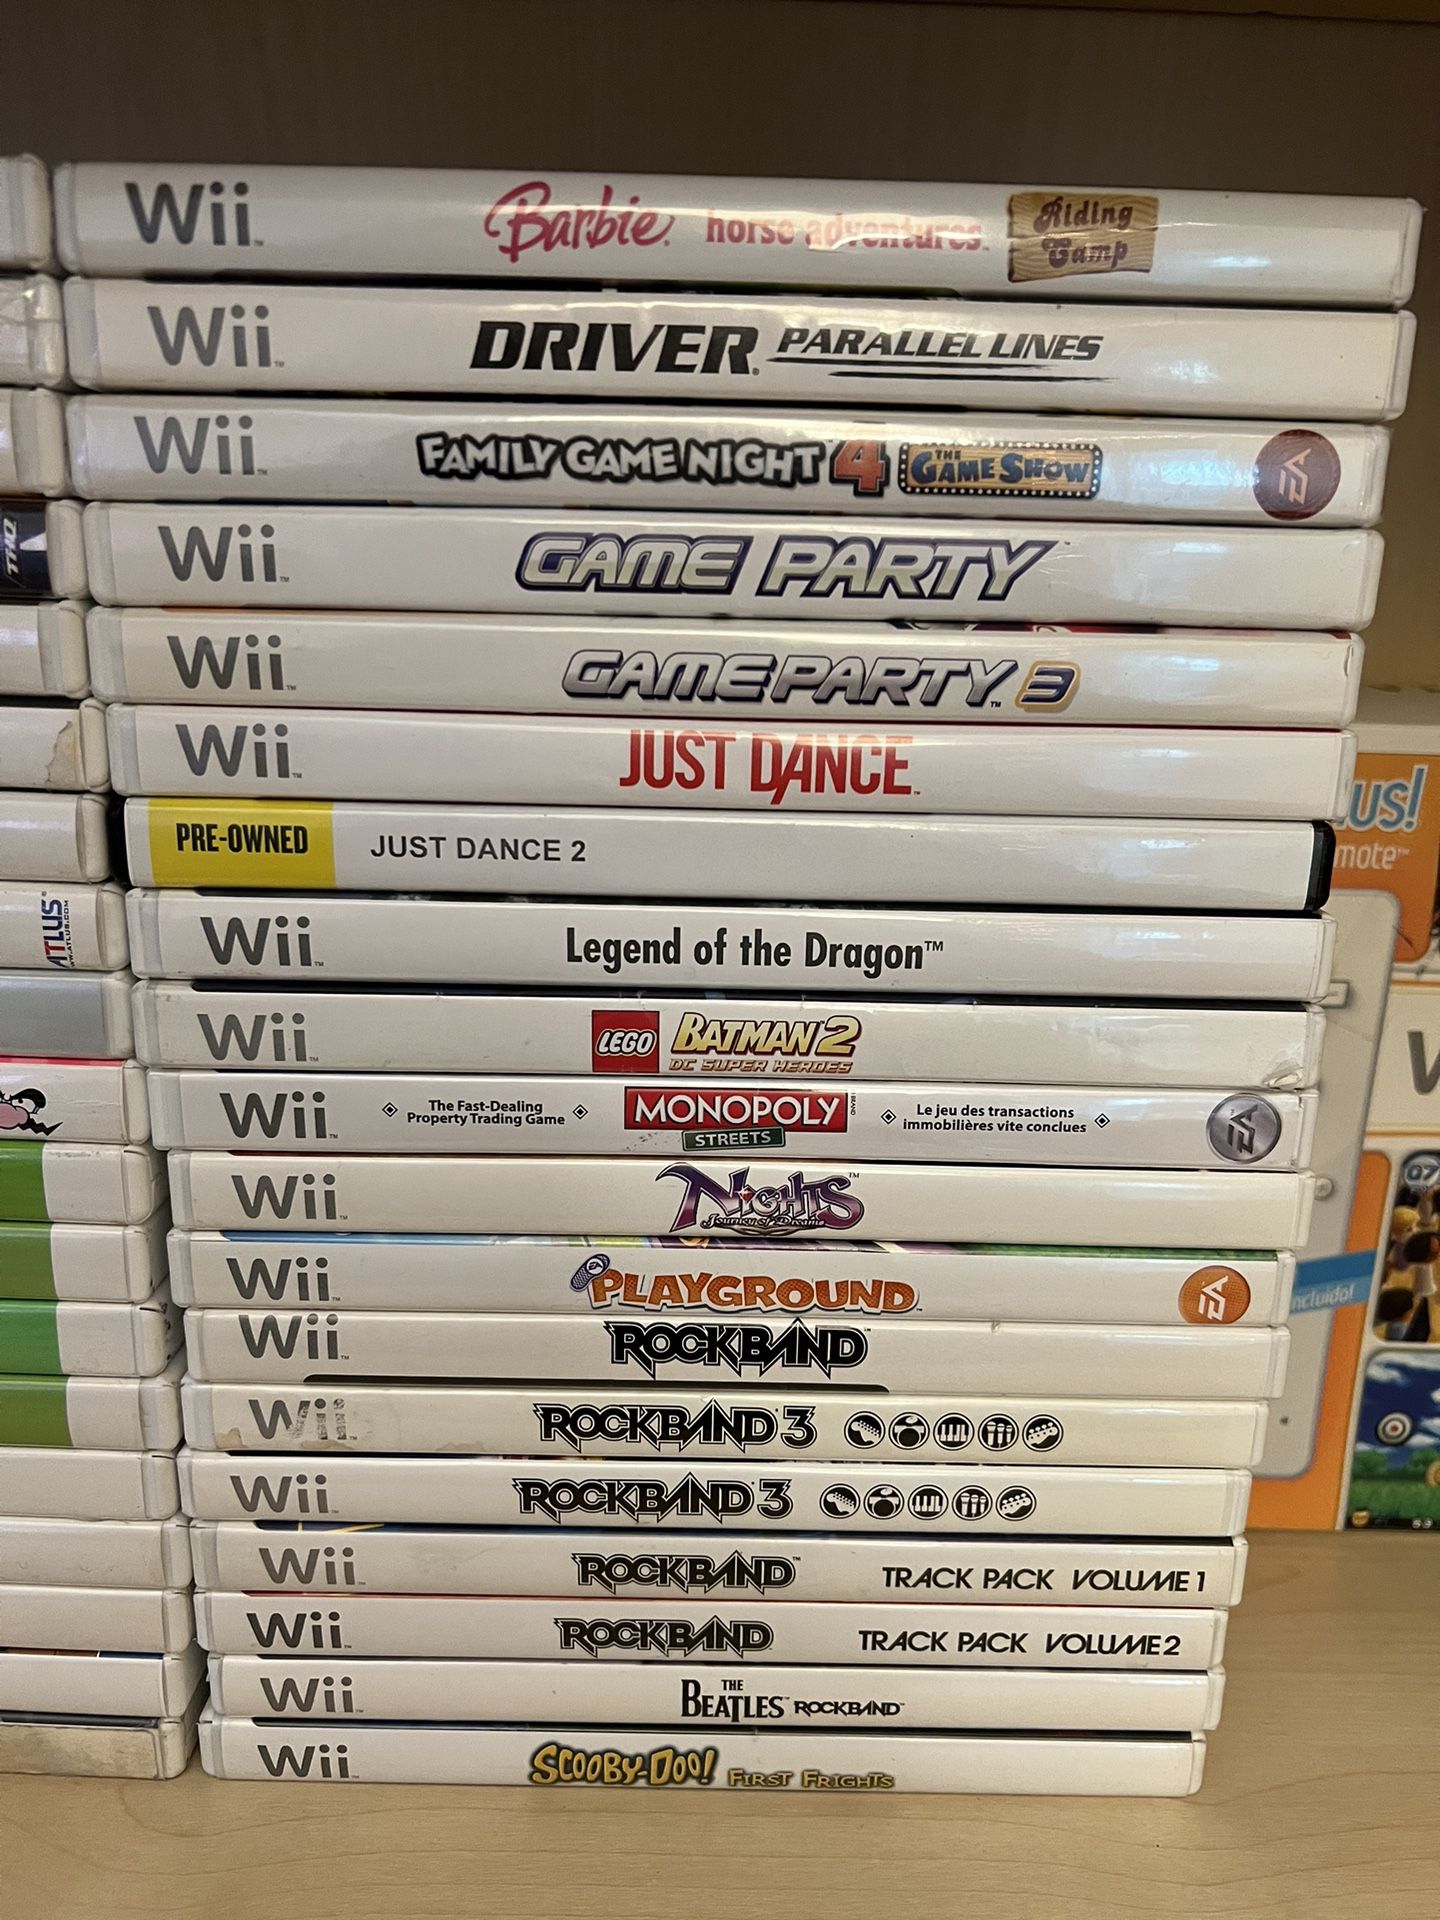 Nintendo Wii and Wii U Games & Accessories (Read Description for Prices)